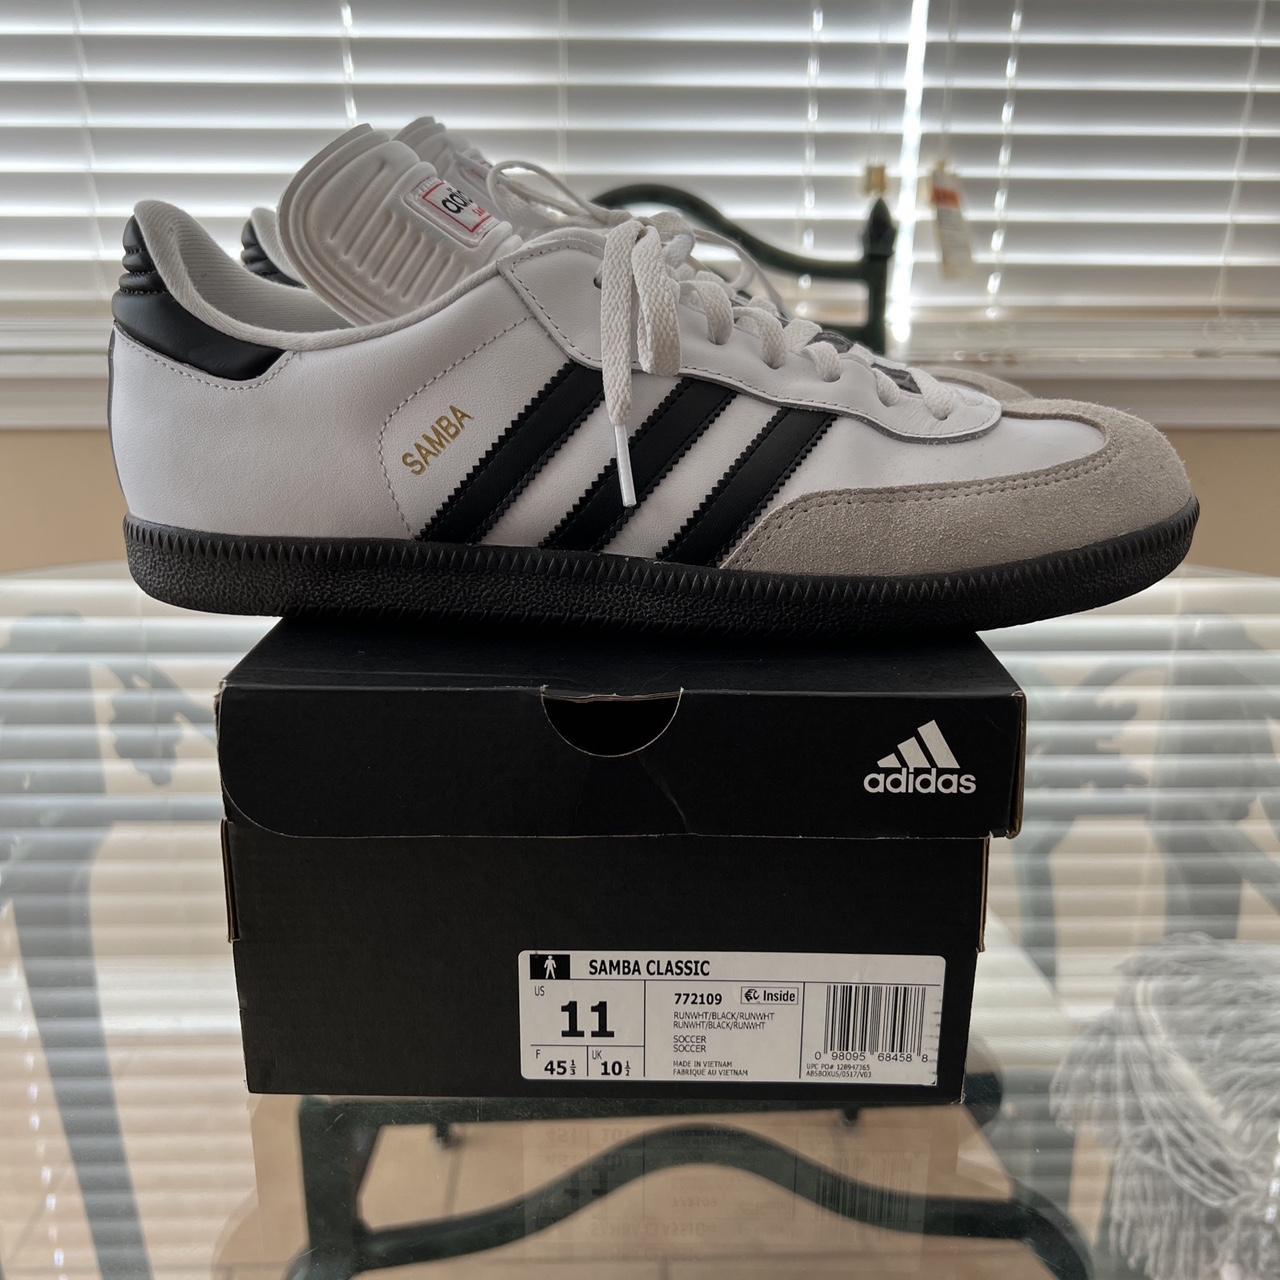 Adidas Men's White and Black Trainers